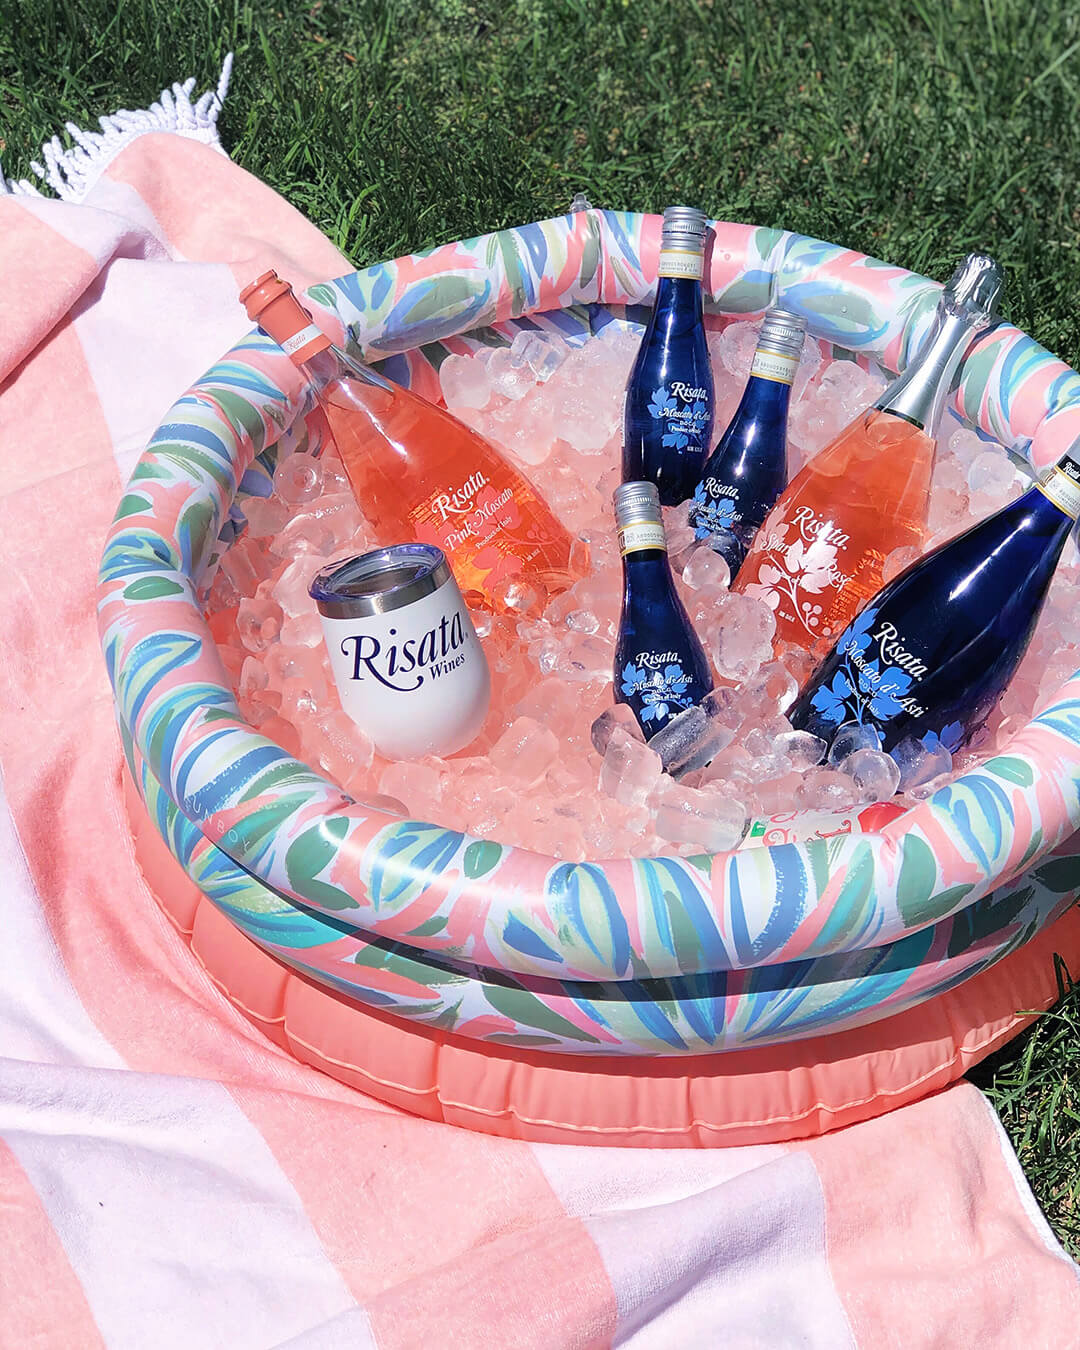 Risata Sparkling rose and moscato d'asti in an ice cooler